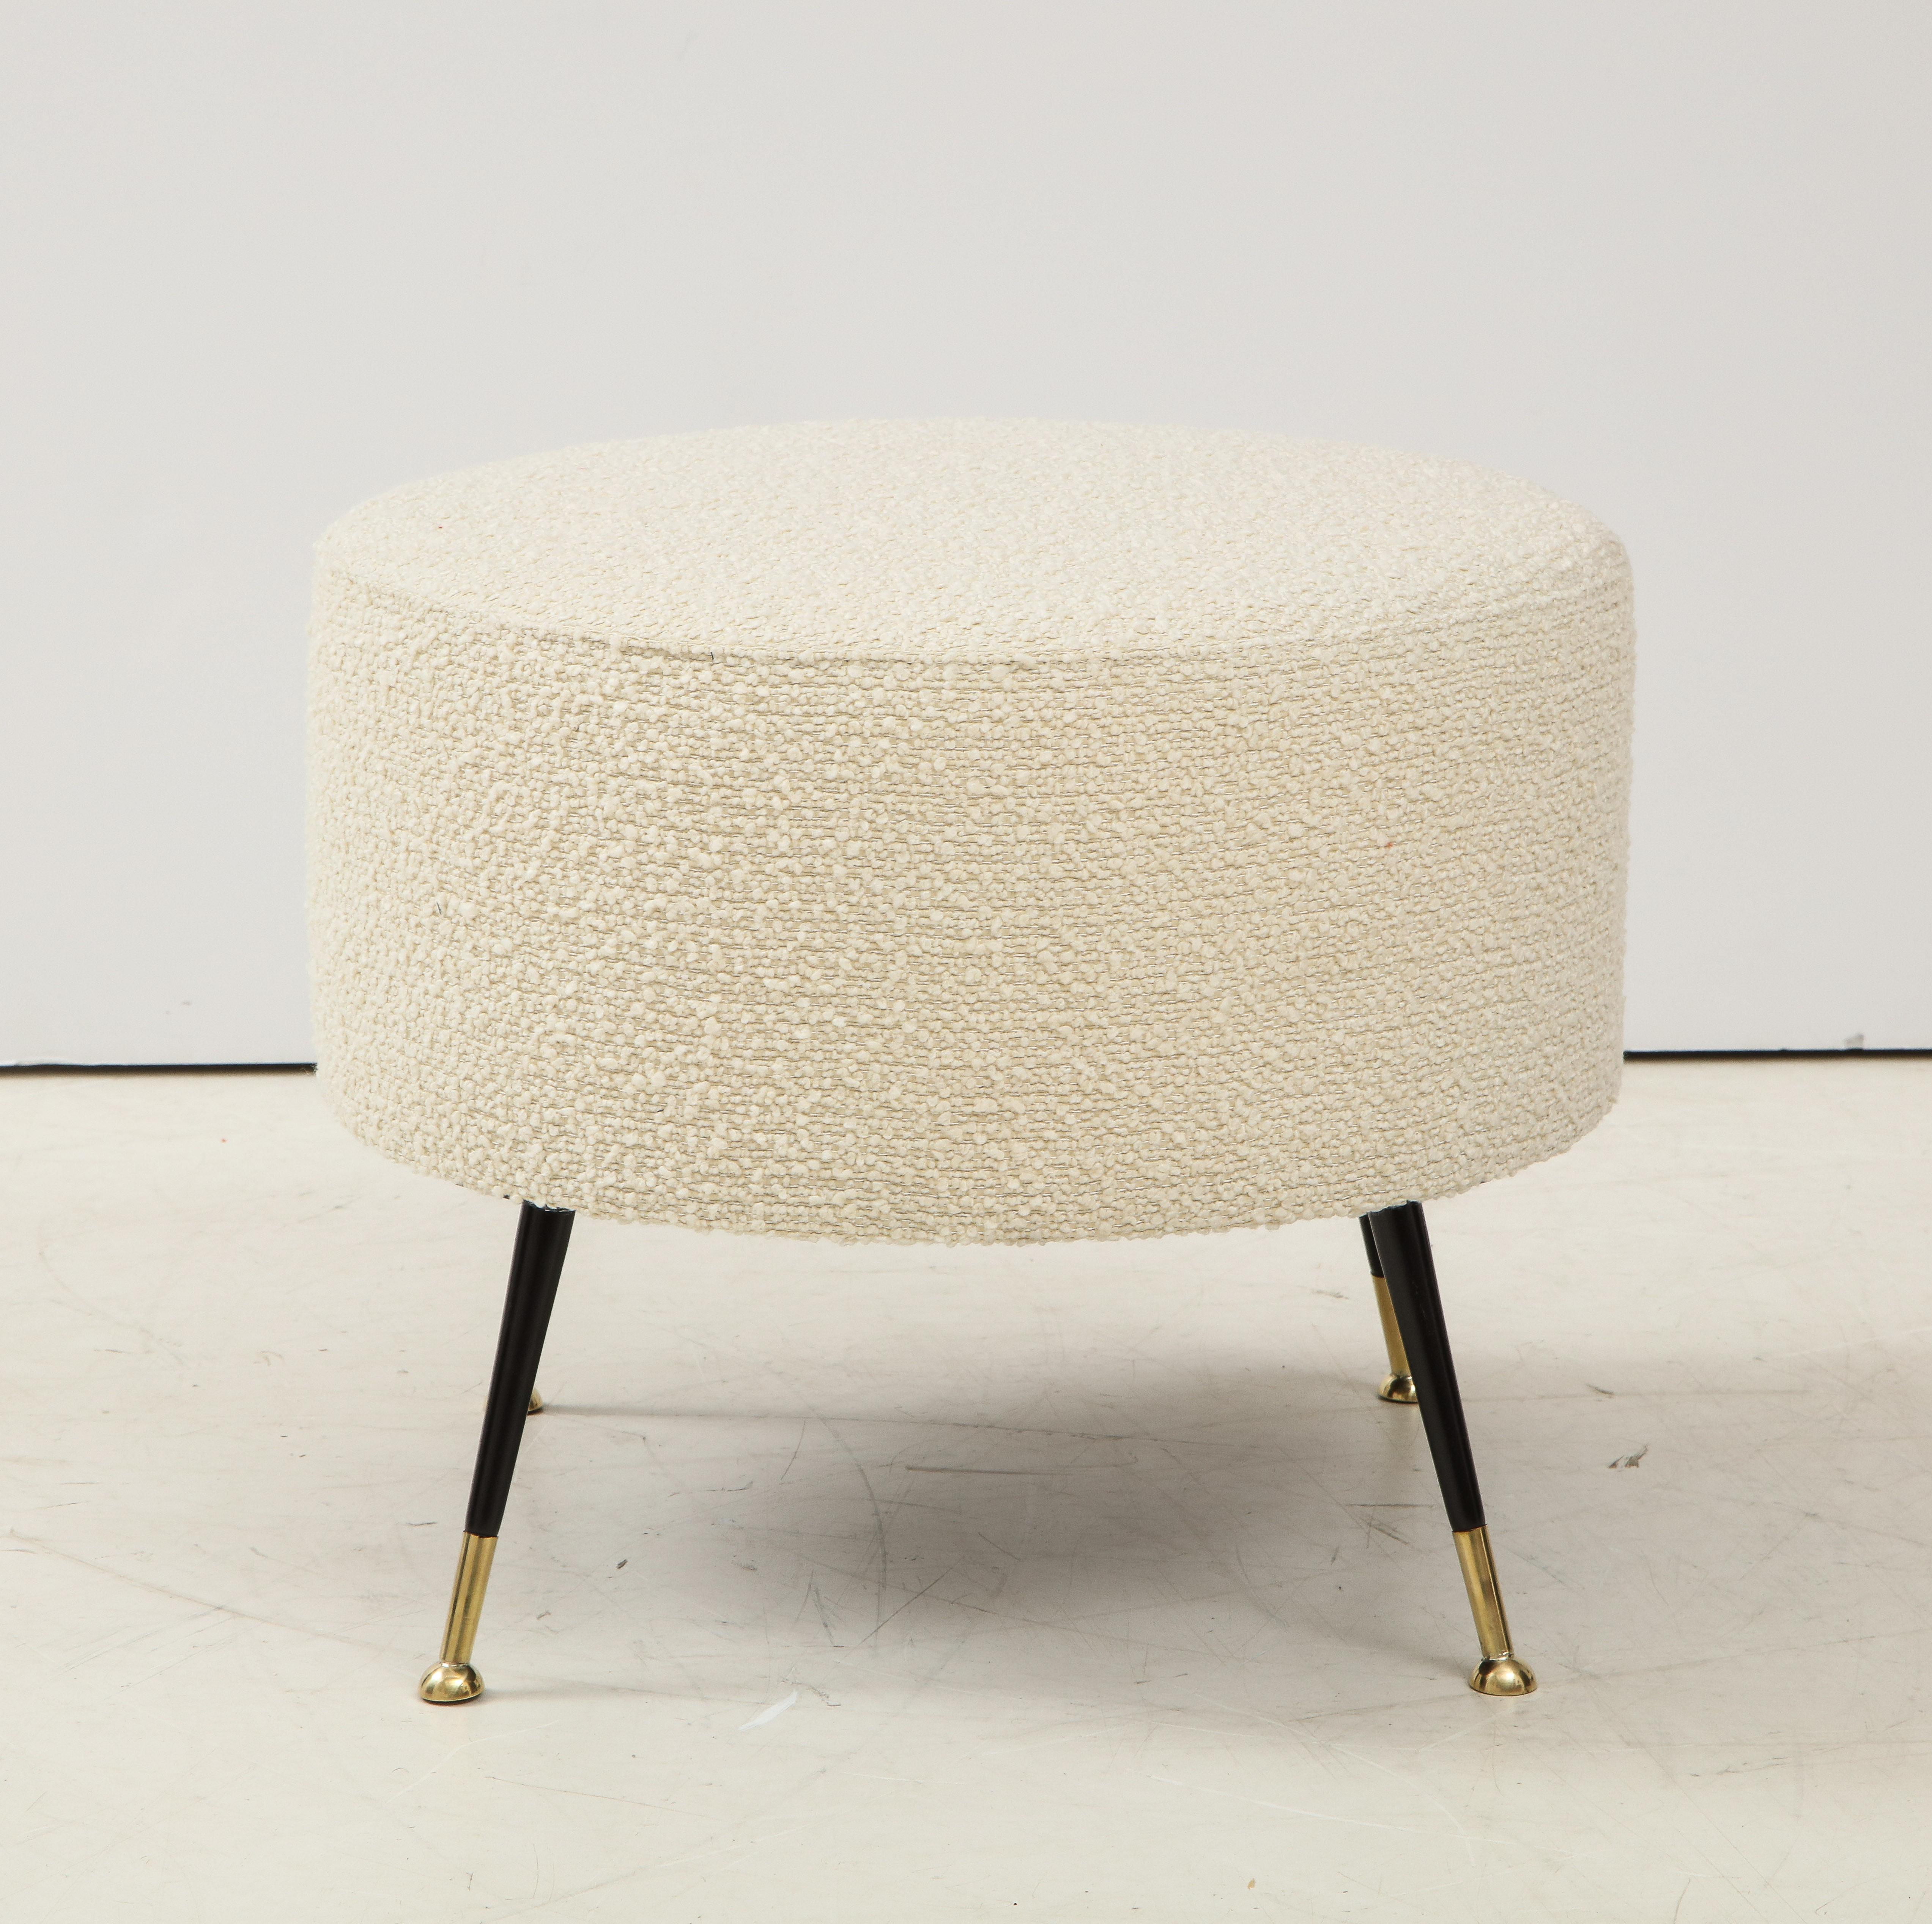 Steel Single Round Stool or Pouf in Ivory Boucle Brass Legs, Italy, 2021